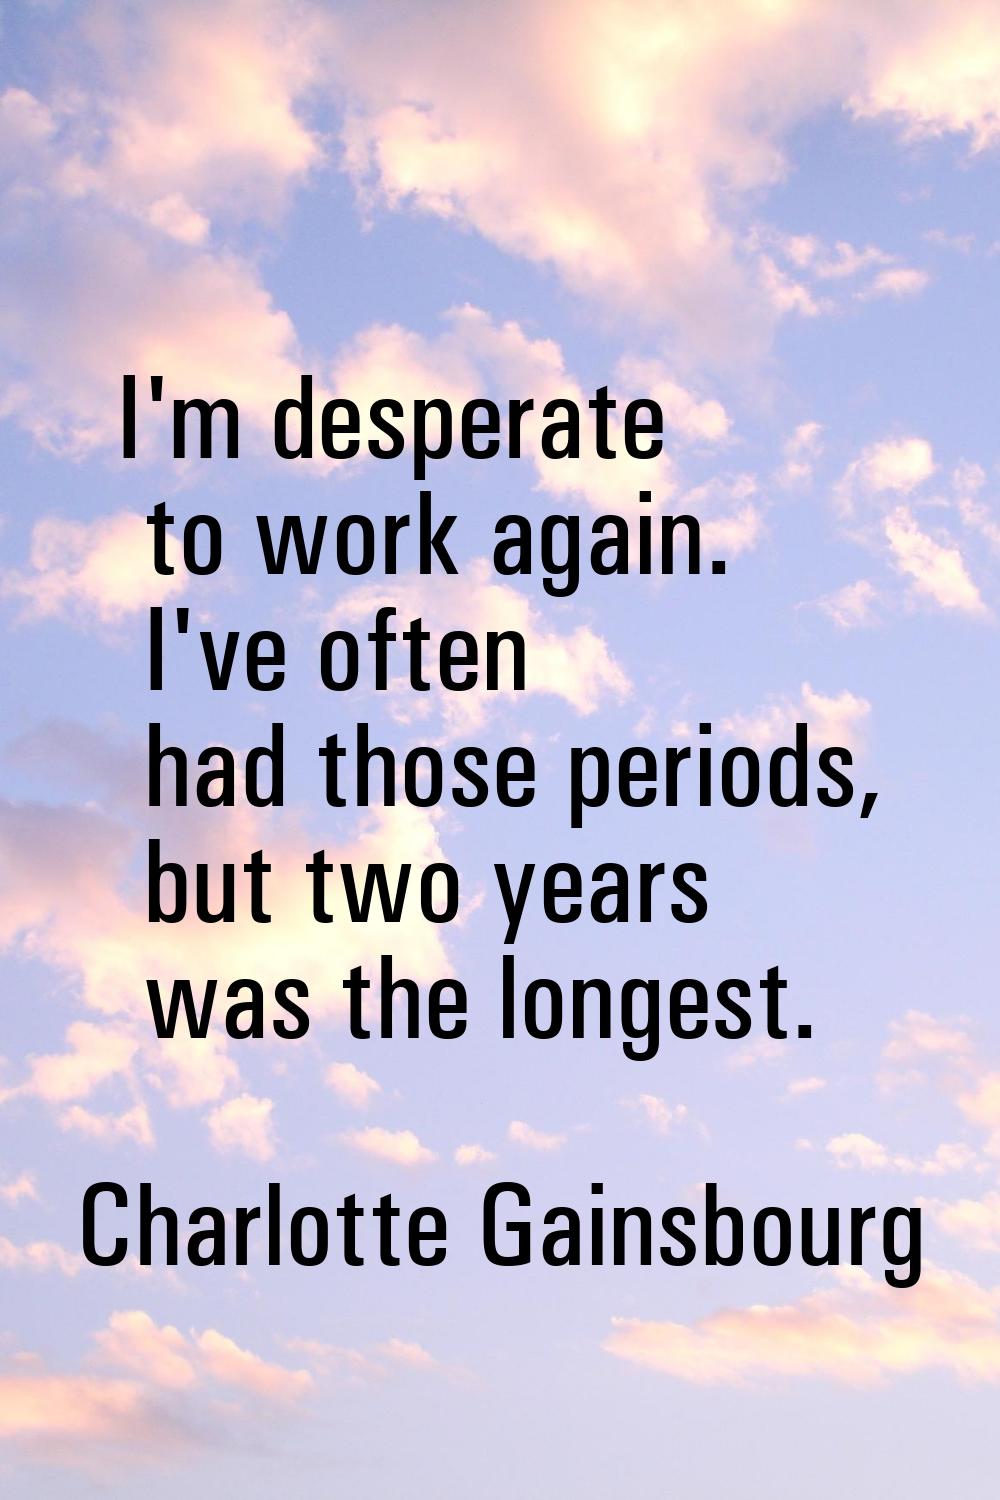 I'm desperate to work again. I've often had those periods, but two years was the longest.